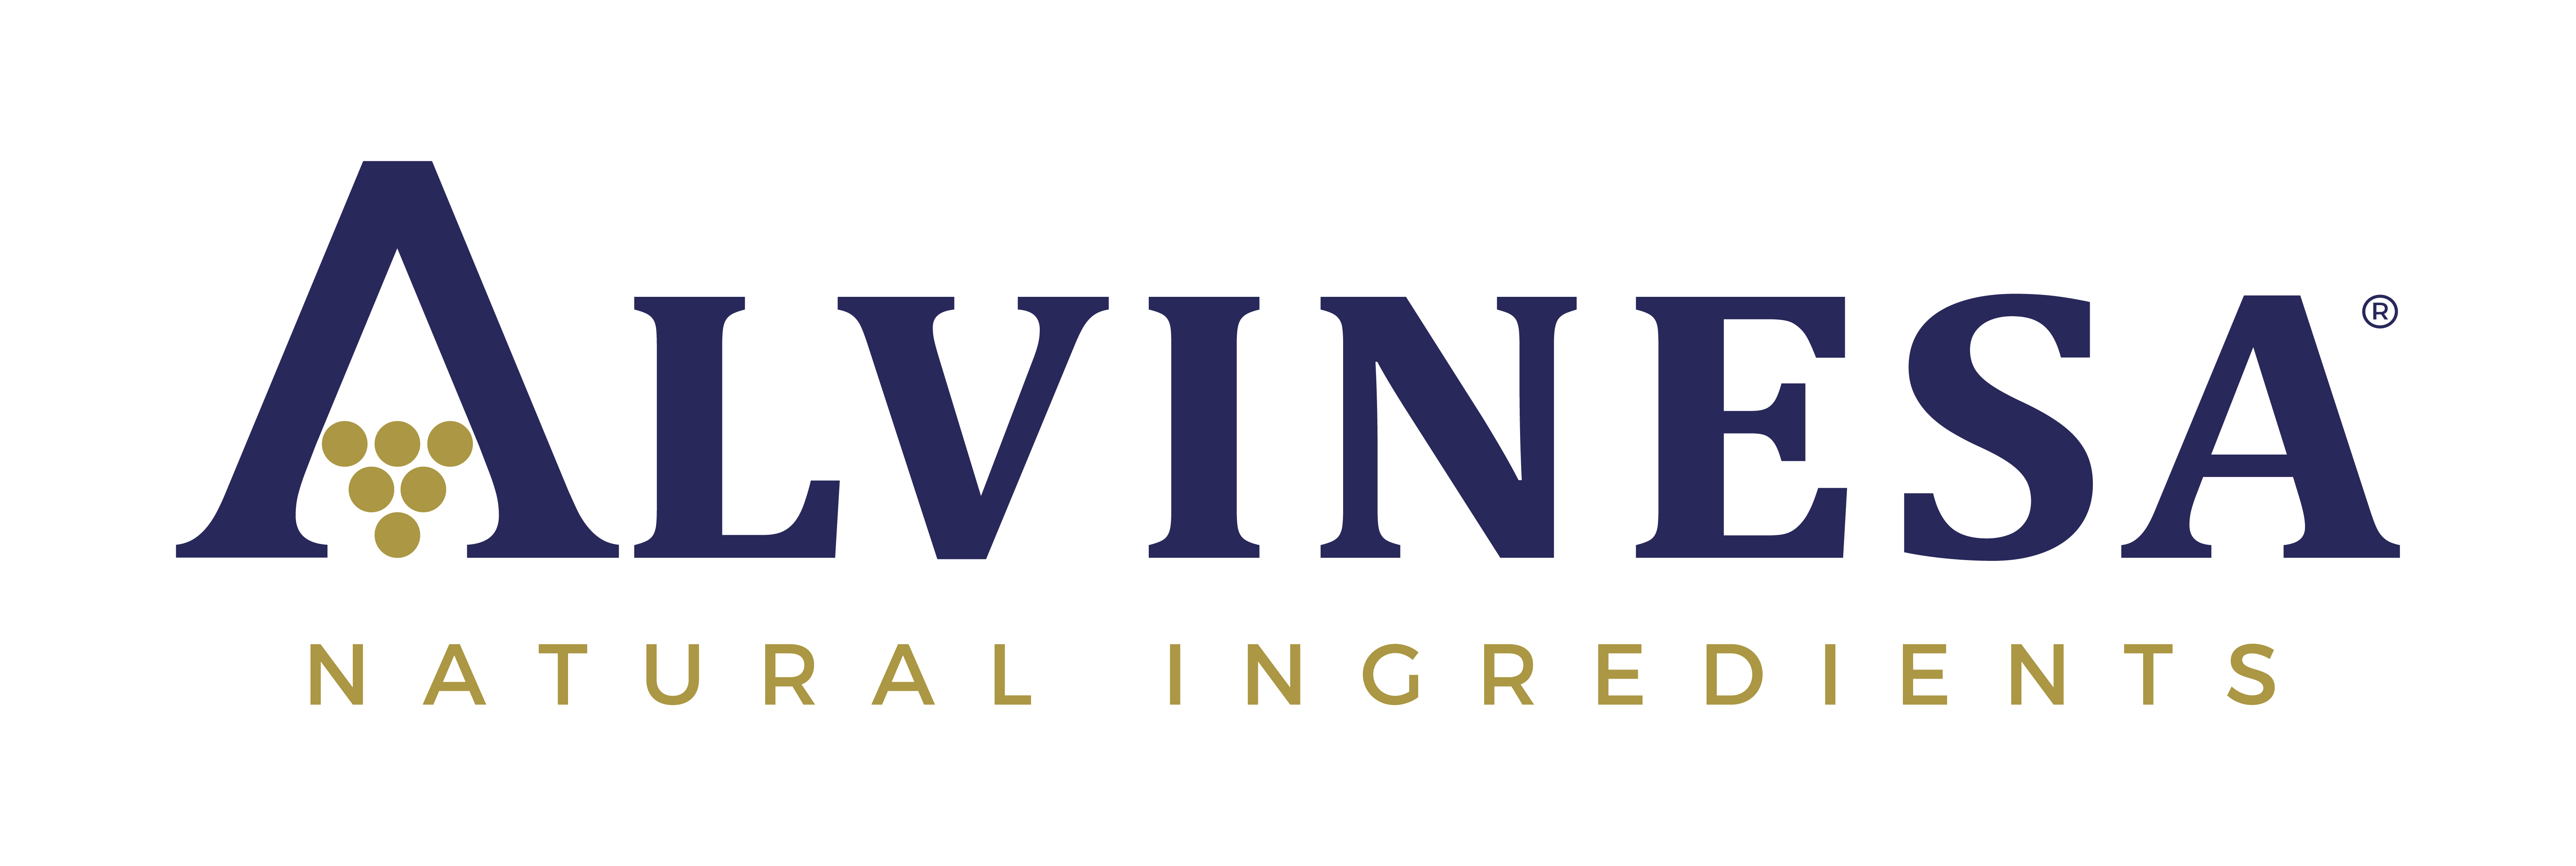 Alvinesa Natural Ingredients S.A.